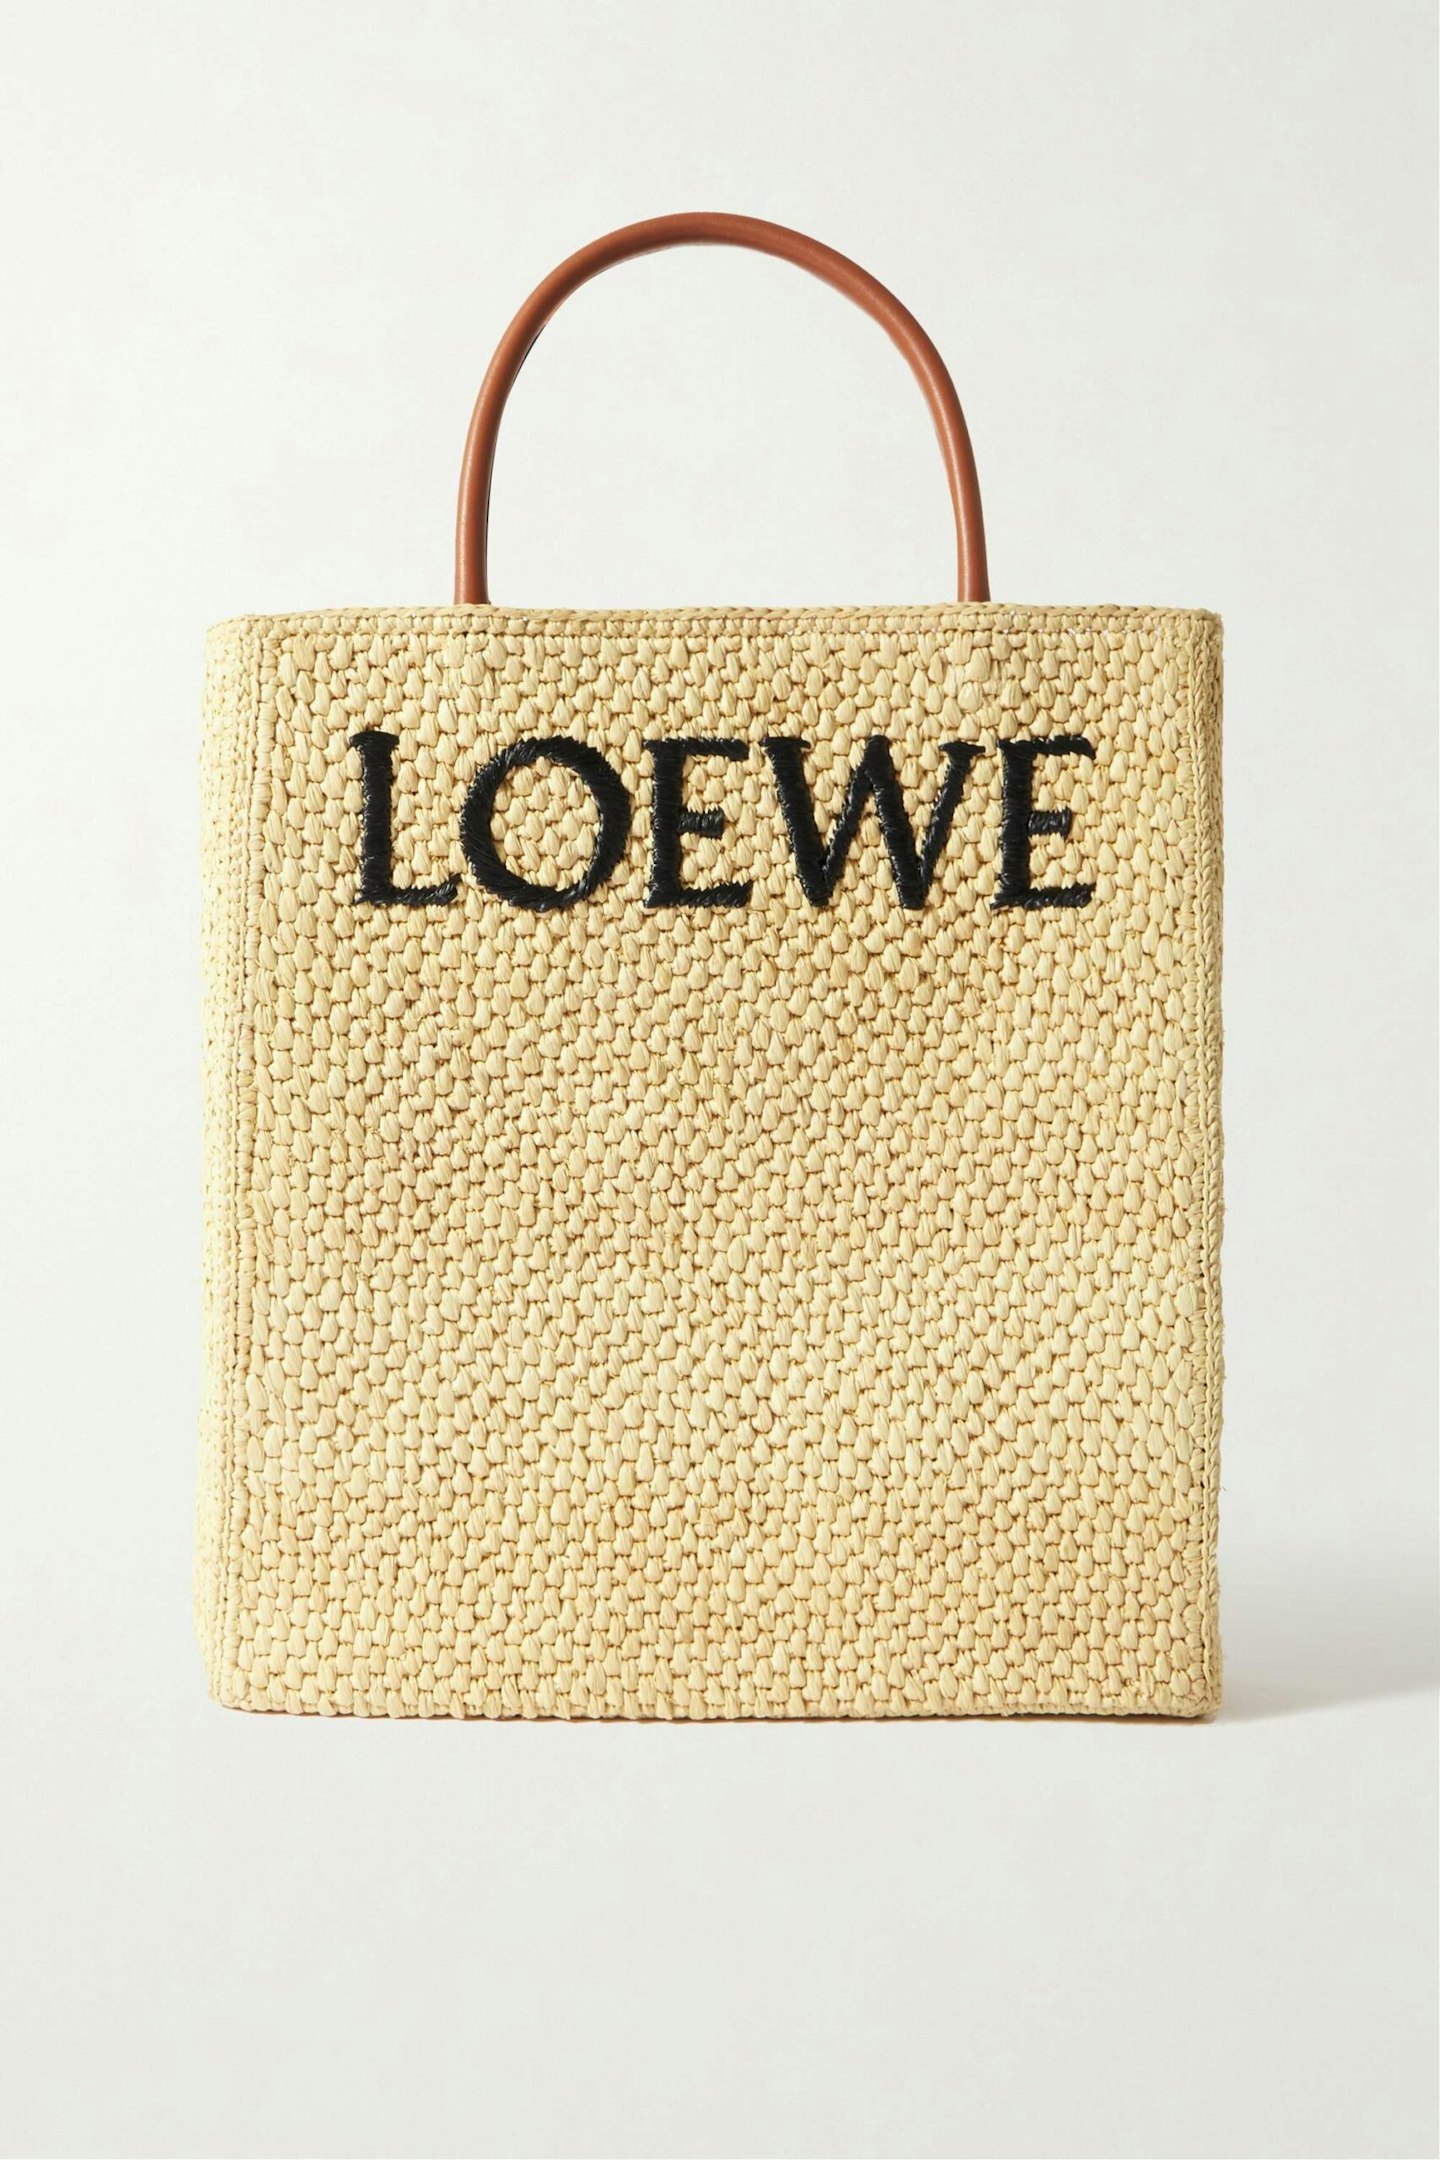 Loewe, Leather-Trimmed Embroidered Raffia Tote